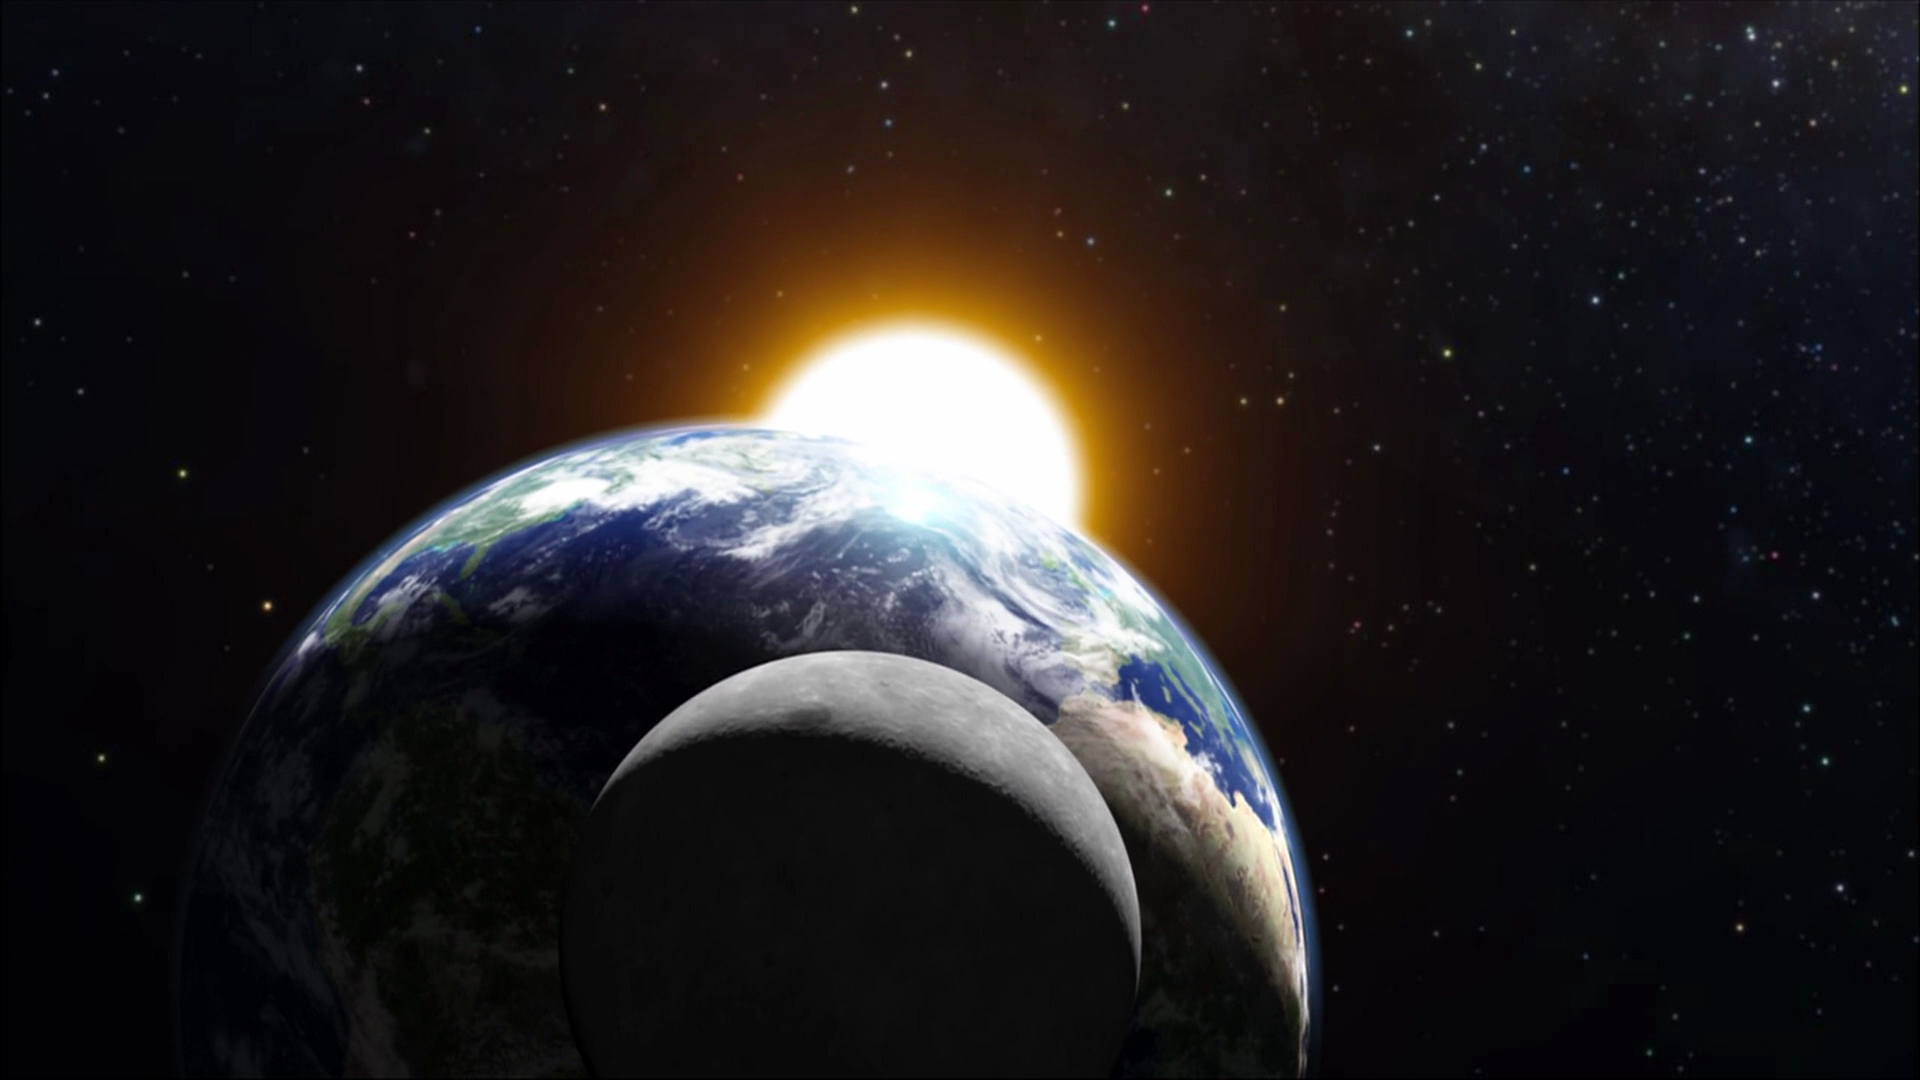 1920x1080 The earth, moon and sun Full size | Gifex | Sun and earth, Planets, Lunar eclipse